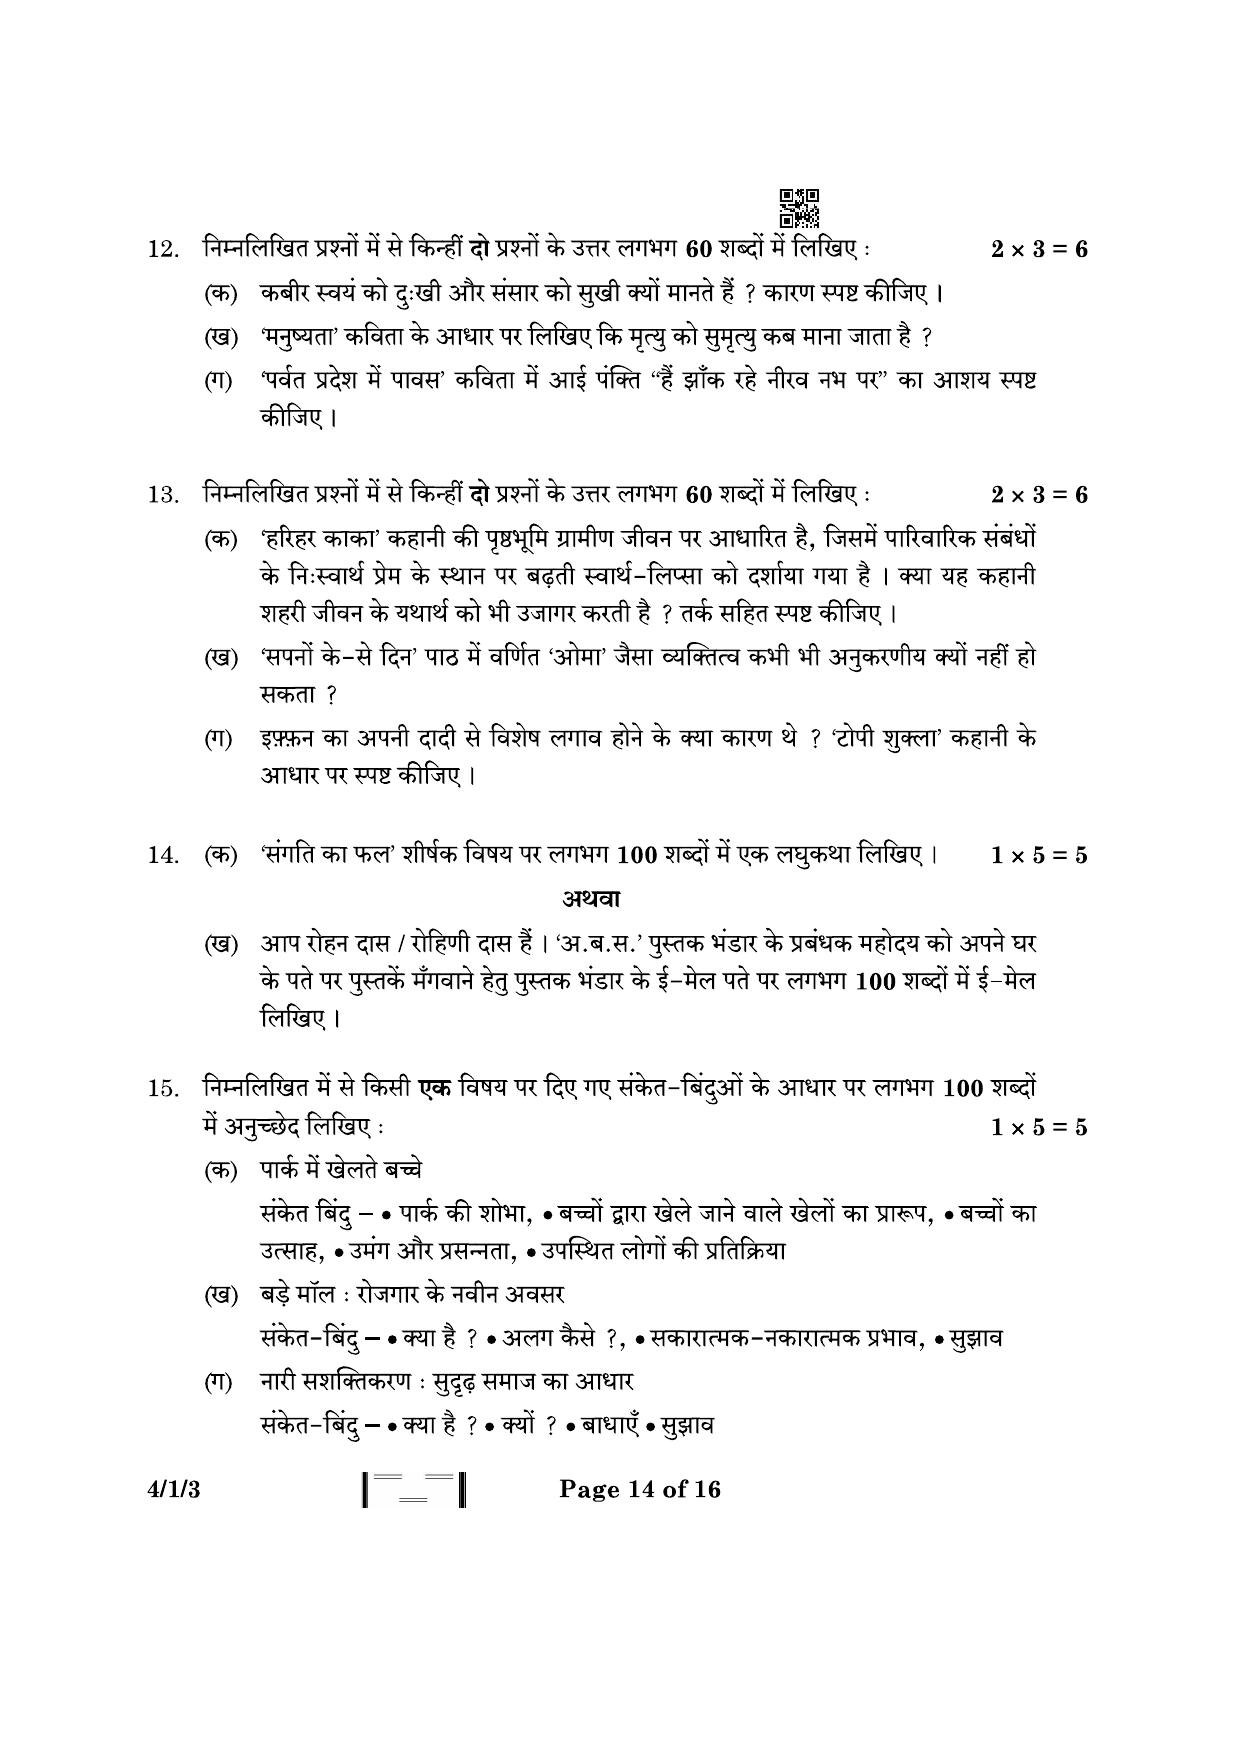 CBSE Class 10 4-1-3 Hindi B 2023 Question Paper - Page 14